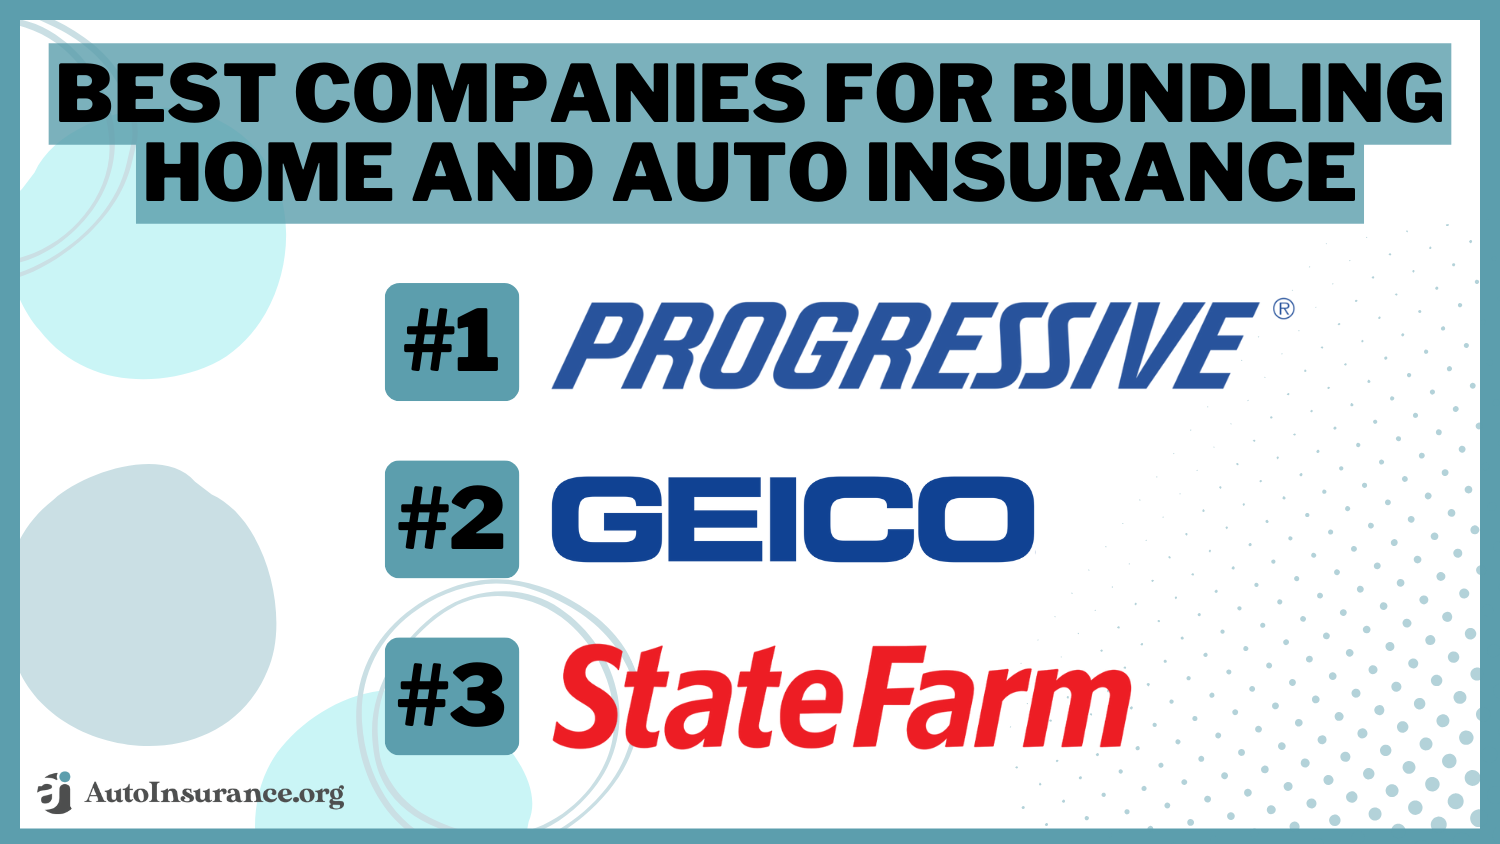 Progressive, geico, state farm Best Companies for Bundling Home and Auto Insurance